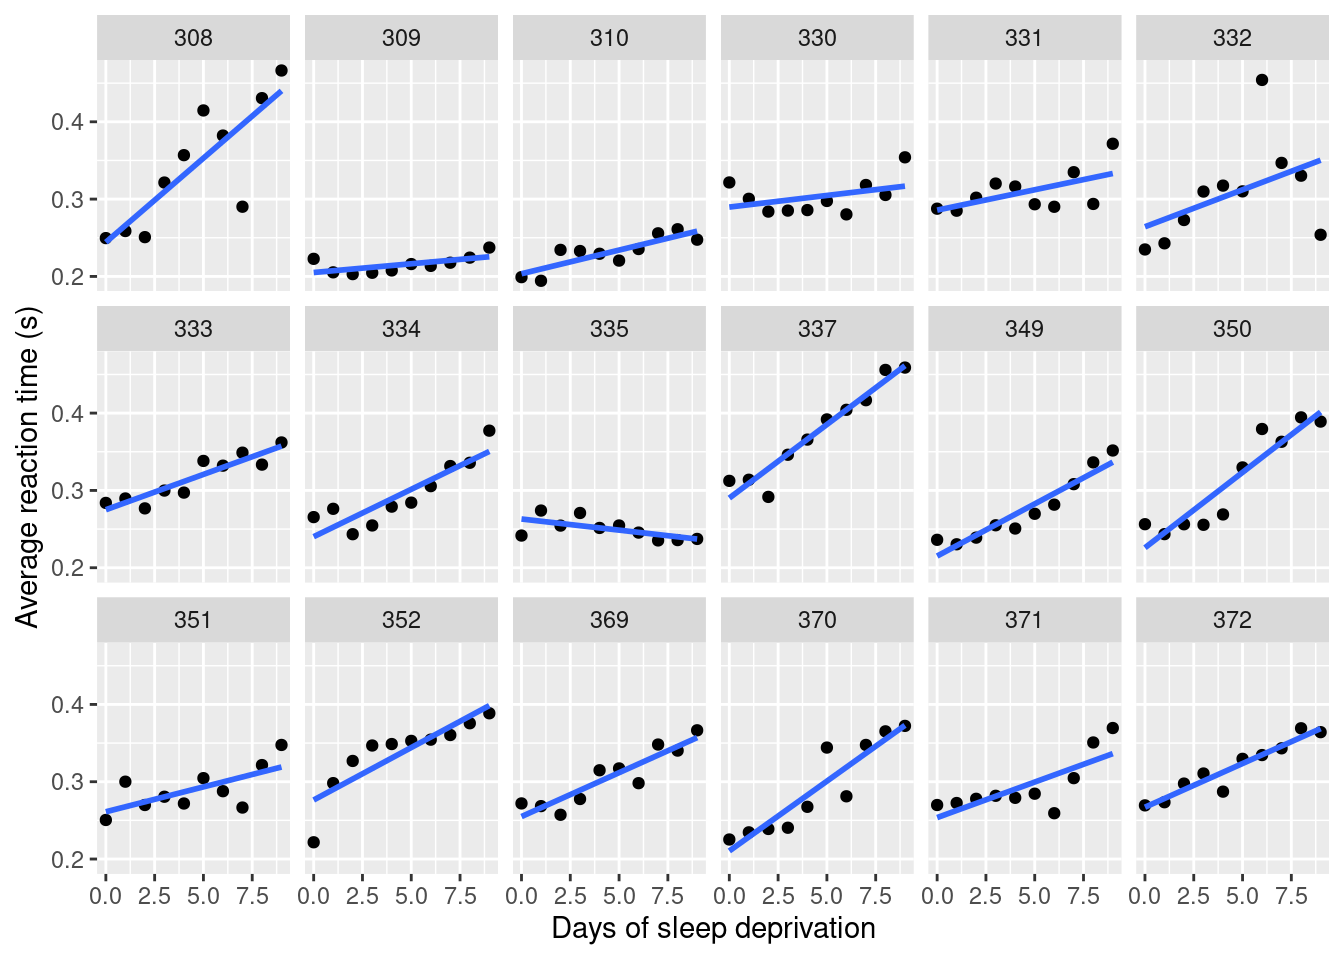 Effect of time (in days) of sleep deprivation on reaction time from the `sleepstudy’ dataset.